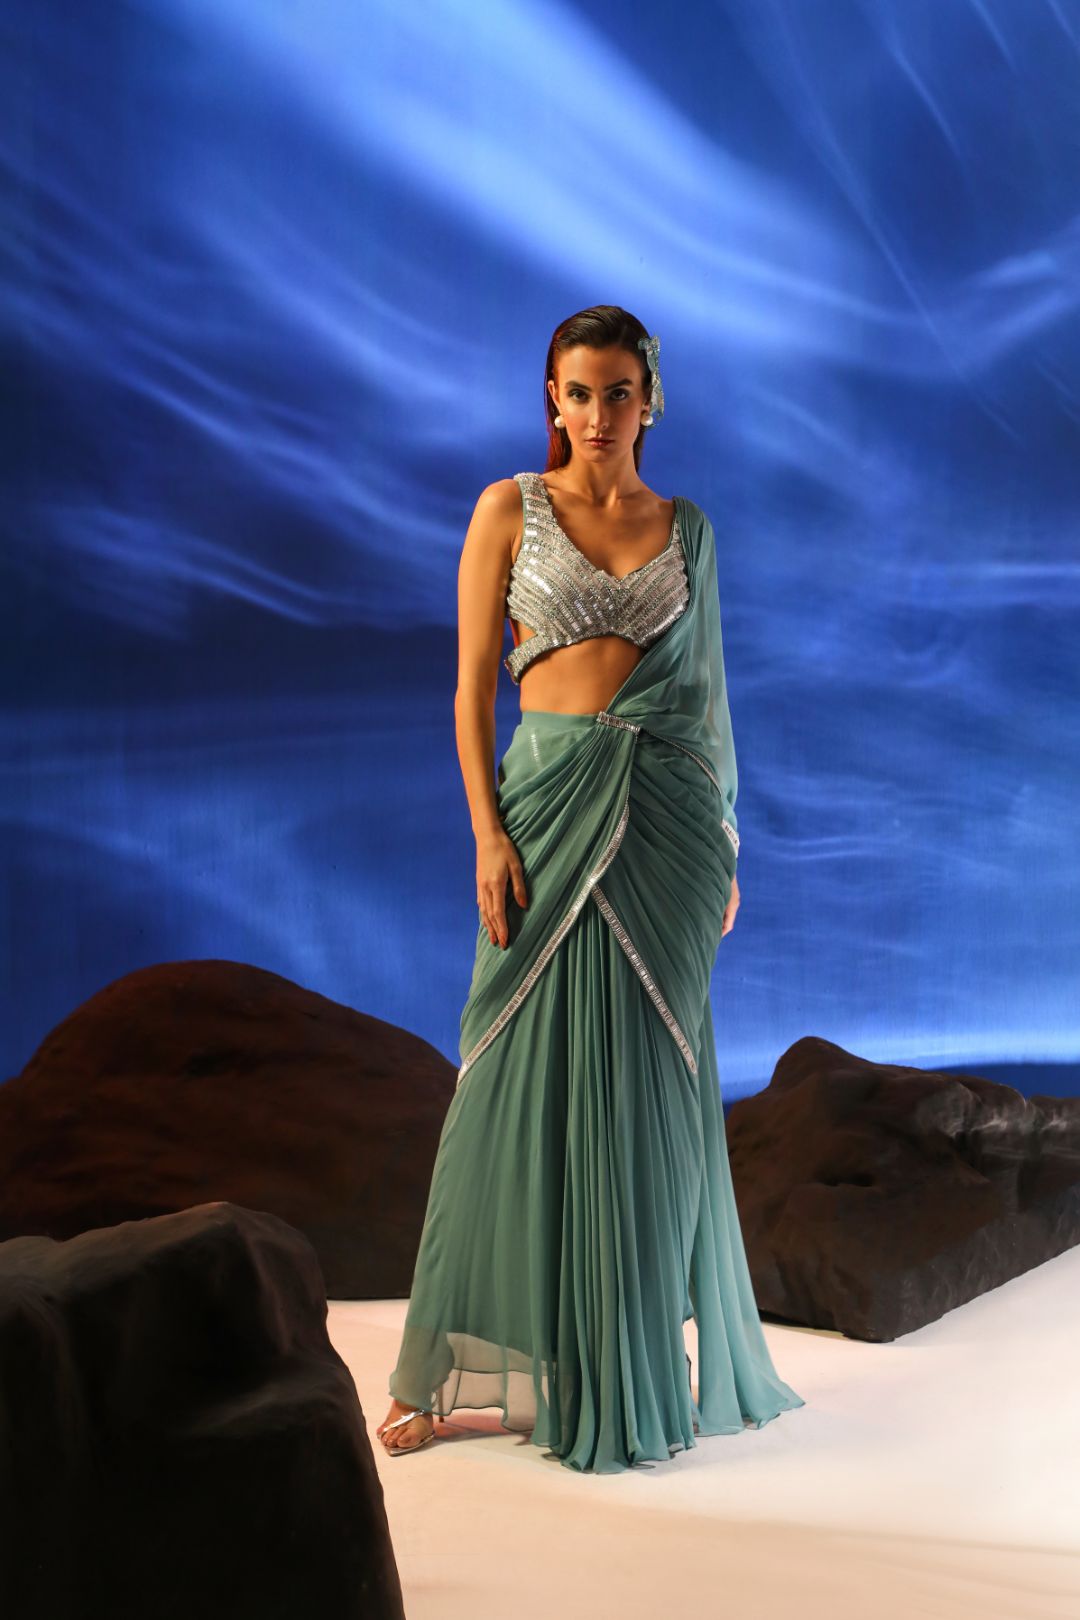 Sarees | Dress indian style, Draping fashion, Drape gowns